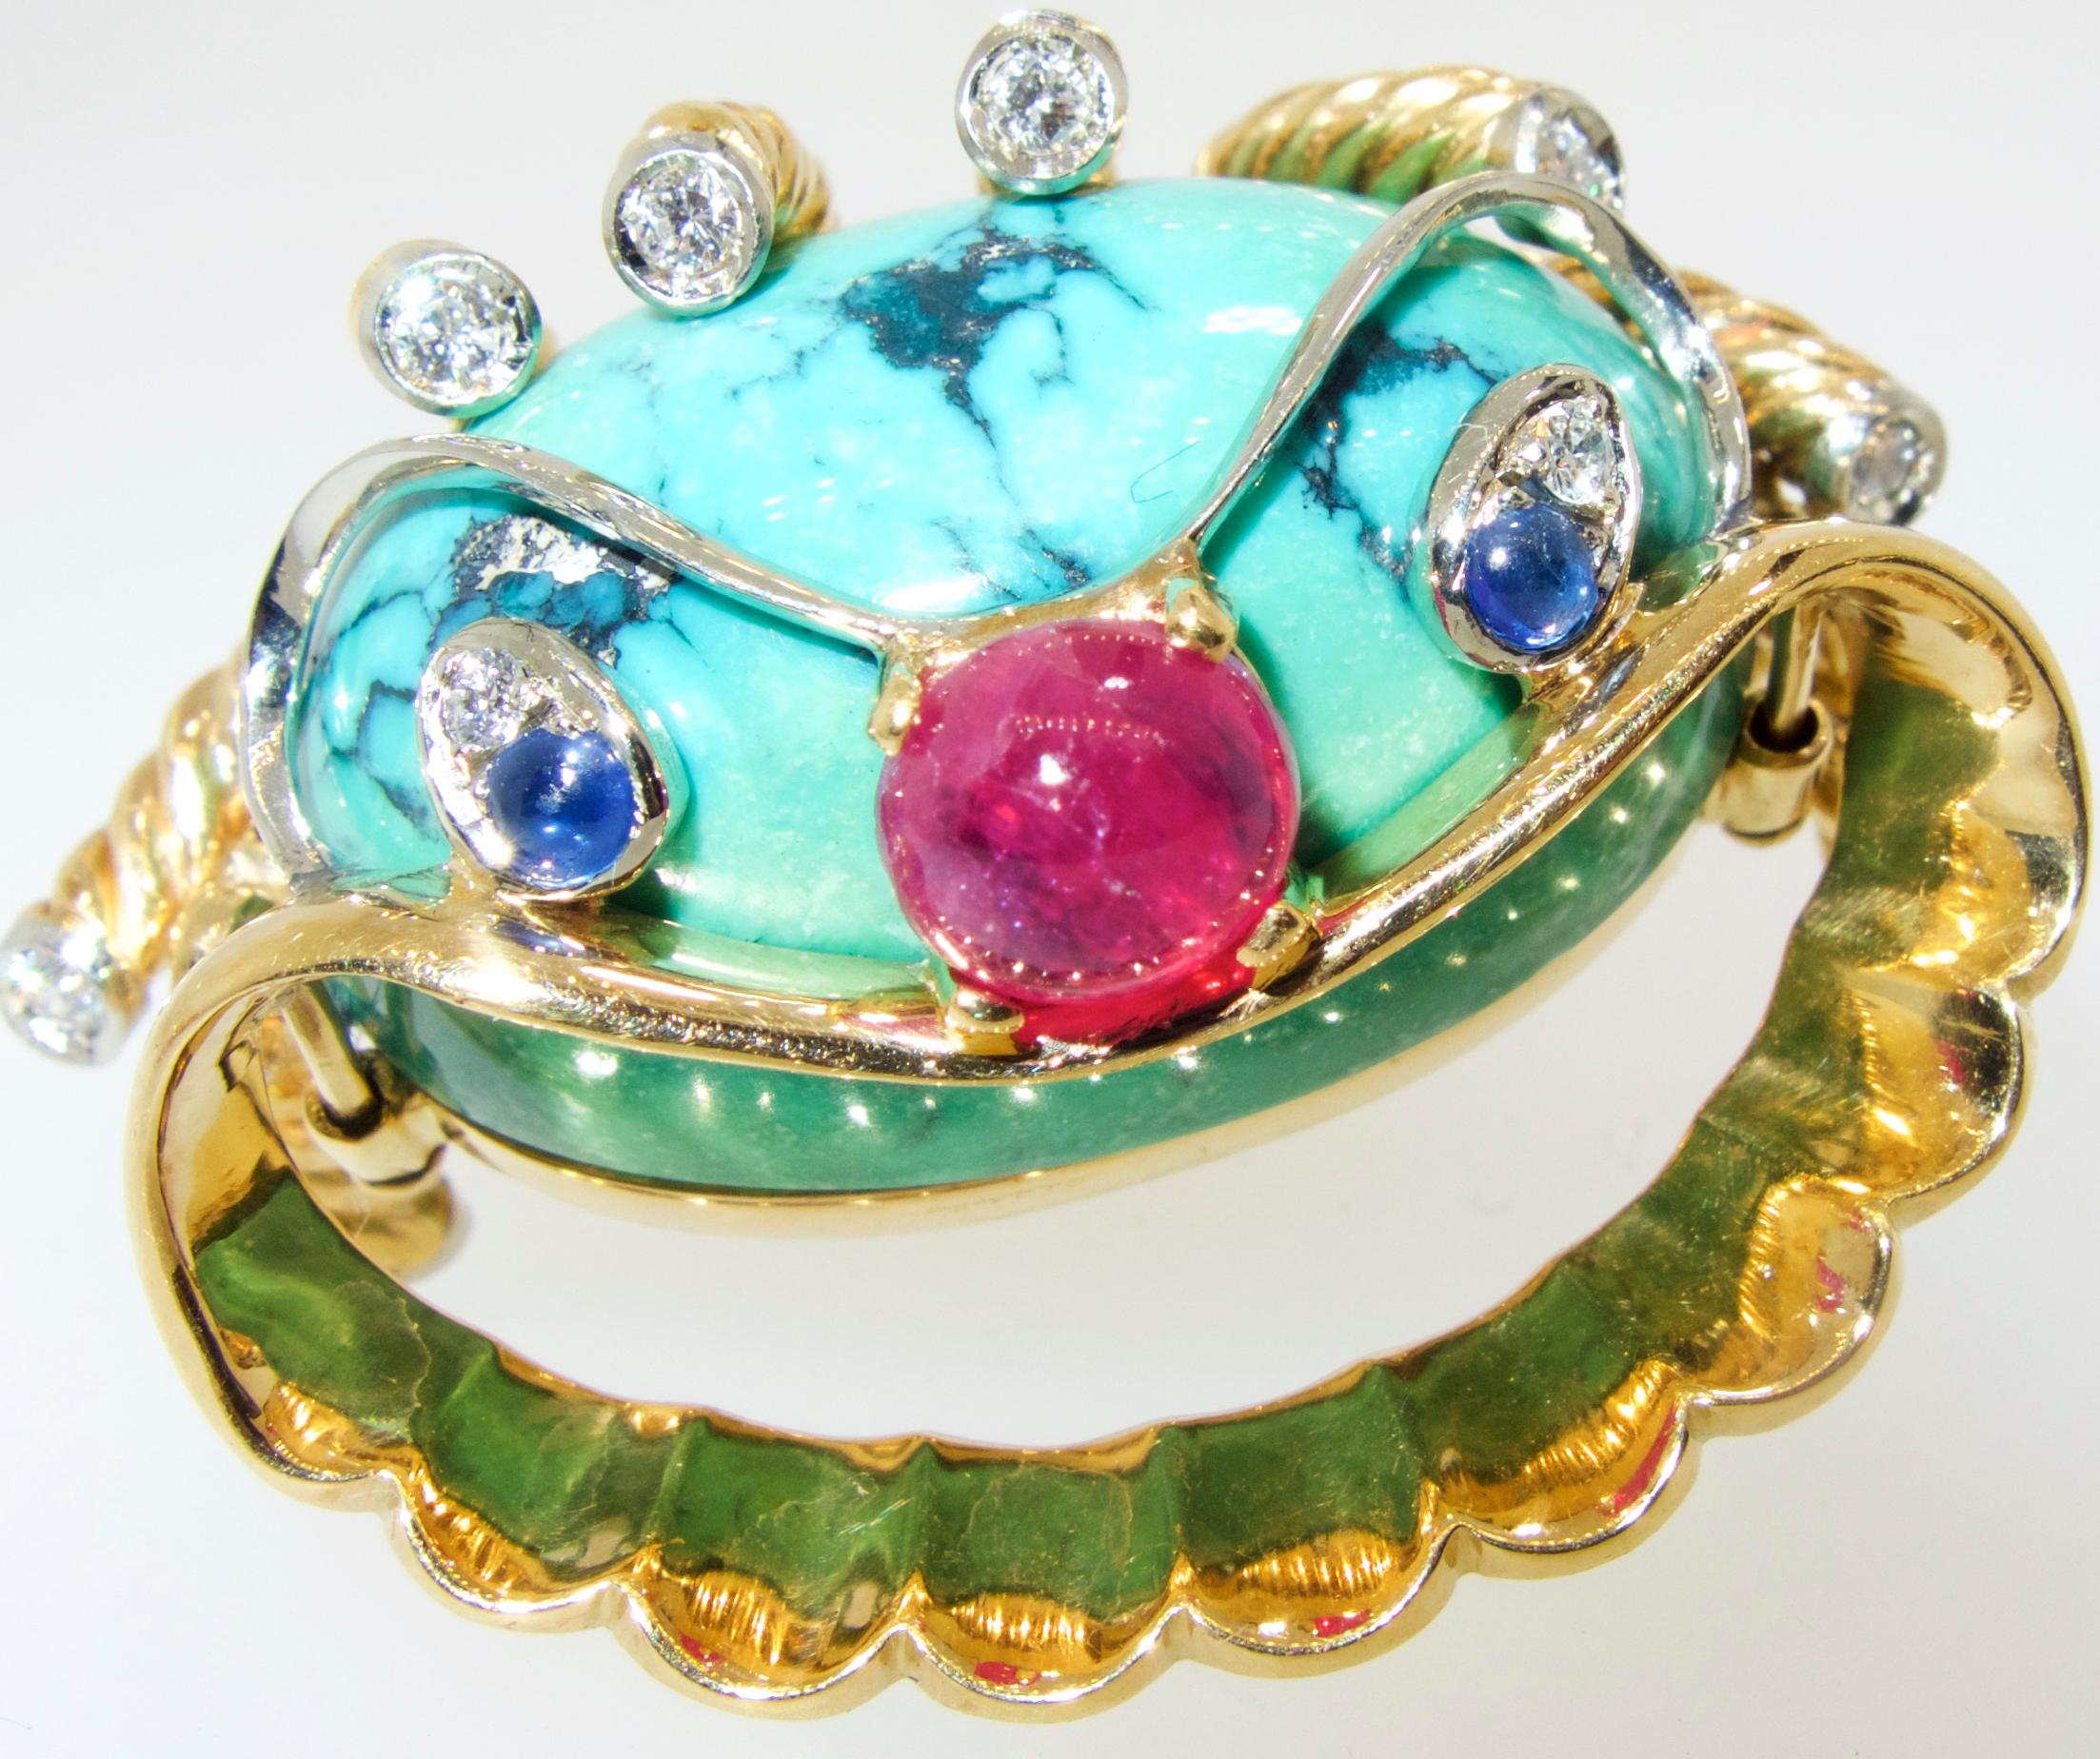 18K circa 1960 clown motif brooch with a ruby nose, sapphire and diamond eyes, turquoise head and diamonds at the end of his hair which which are hinged in such a way so that the tendrils move.  The brooch is 1.5 inches by 1.25 inches.  This amusing